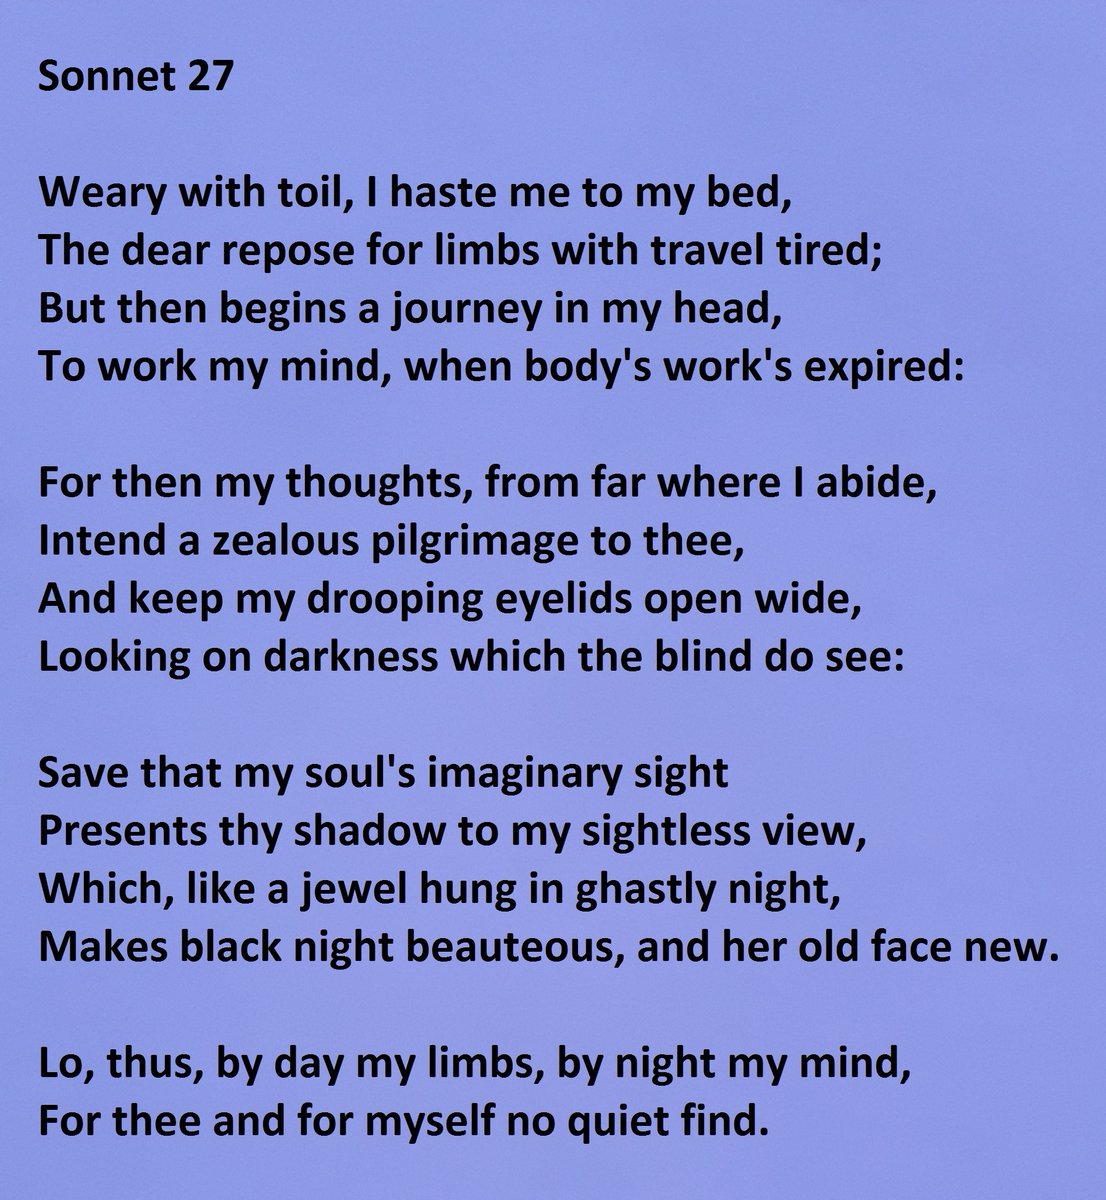 Sonnet 27 by William Shakespeare - "Weary with toil, I haste me to my bed"